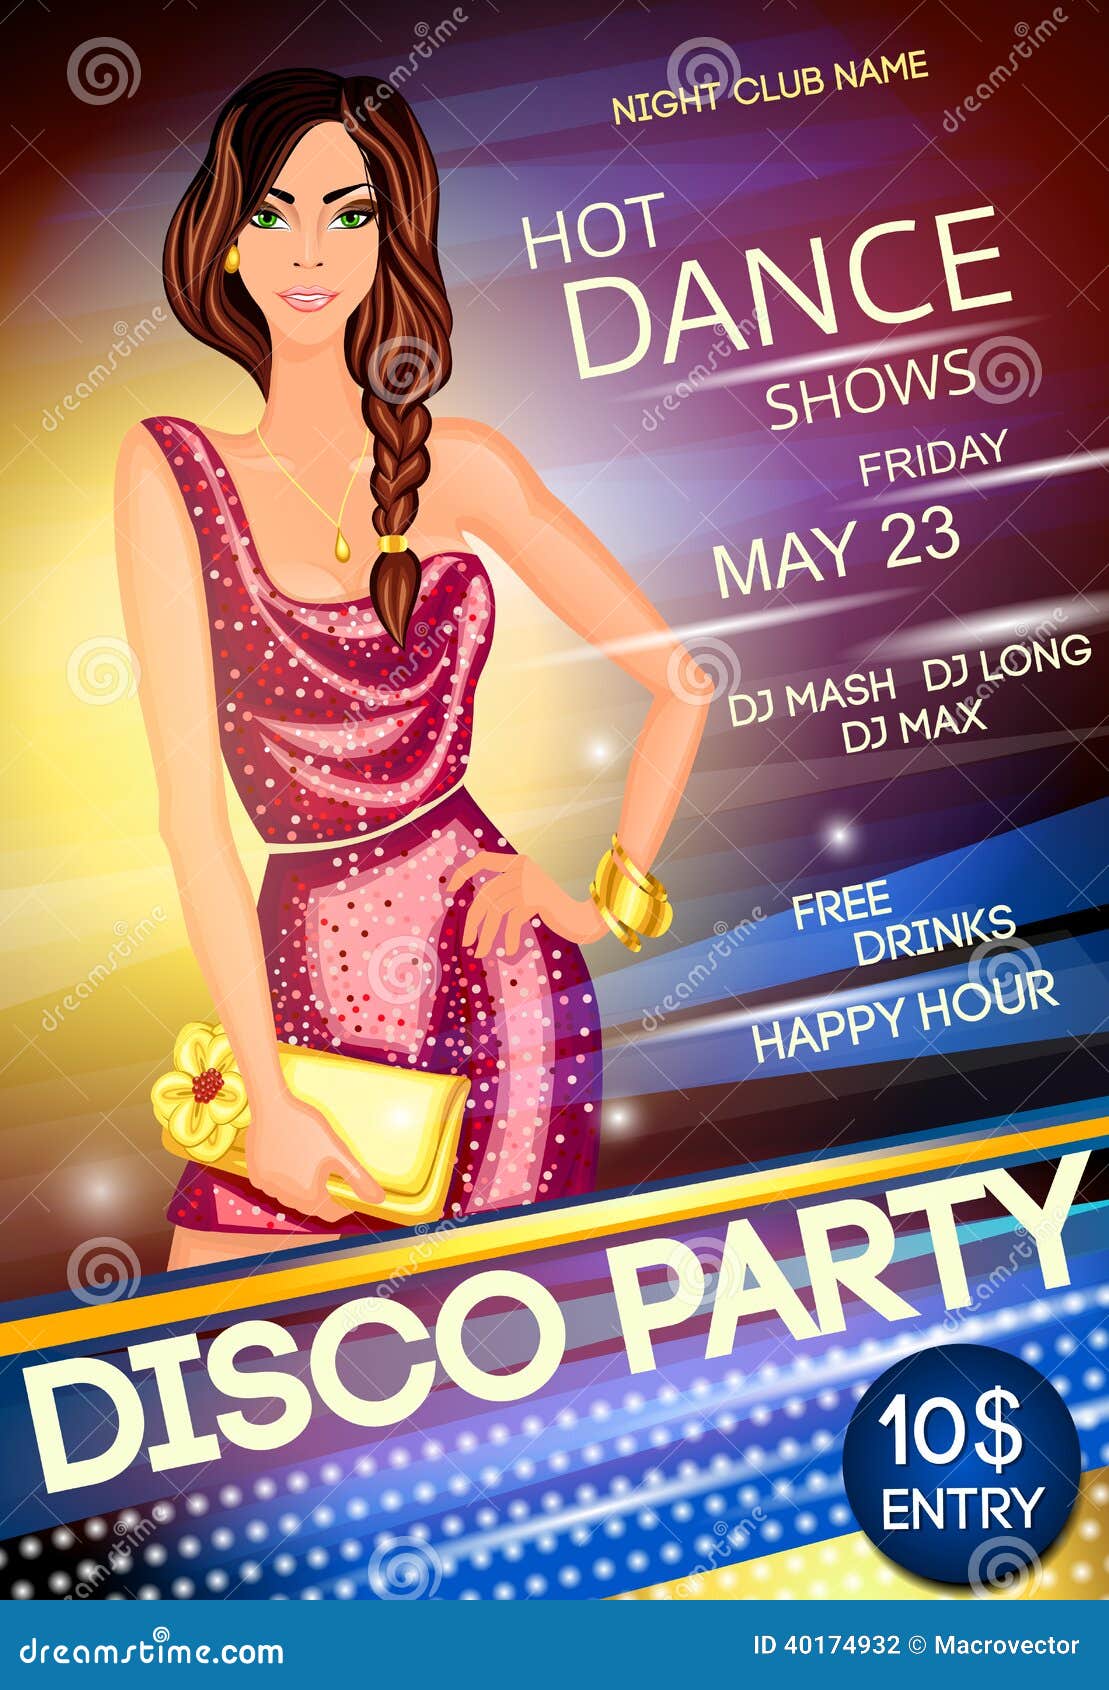 Night Club Disco Party Poster Stock Vector Illustration Of Night